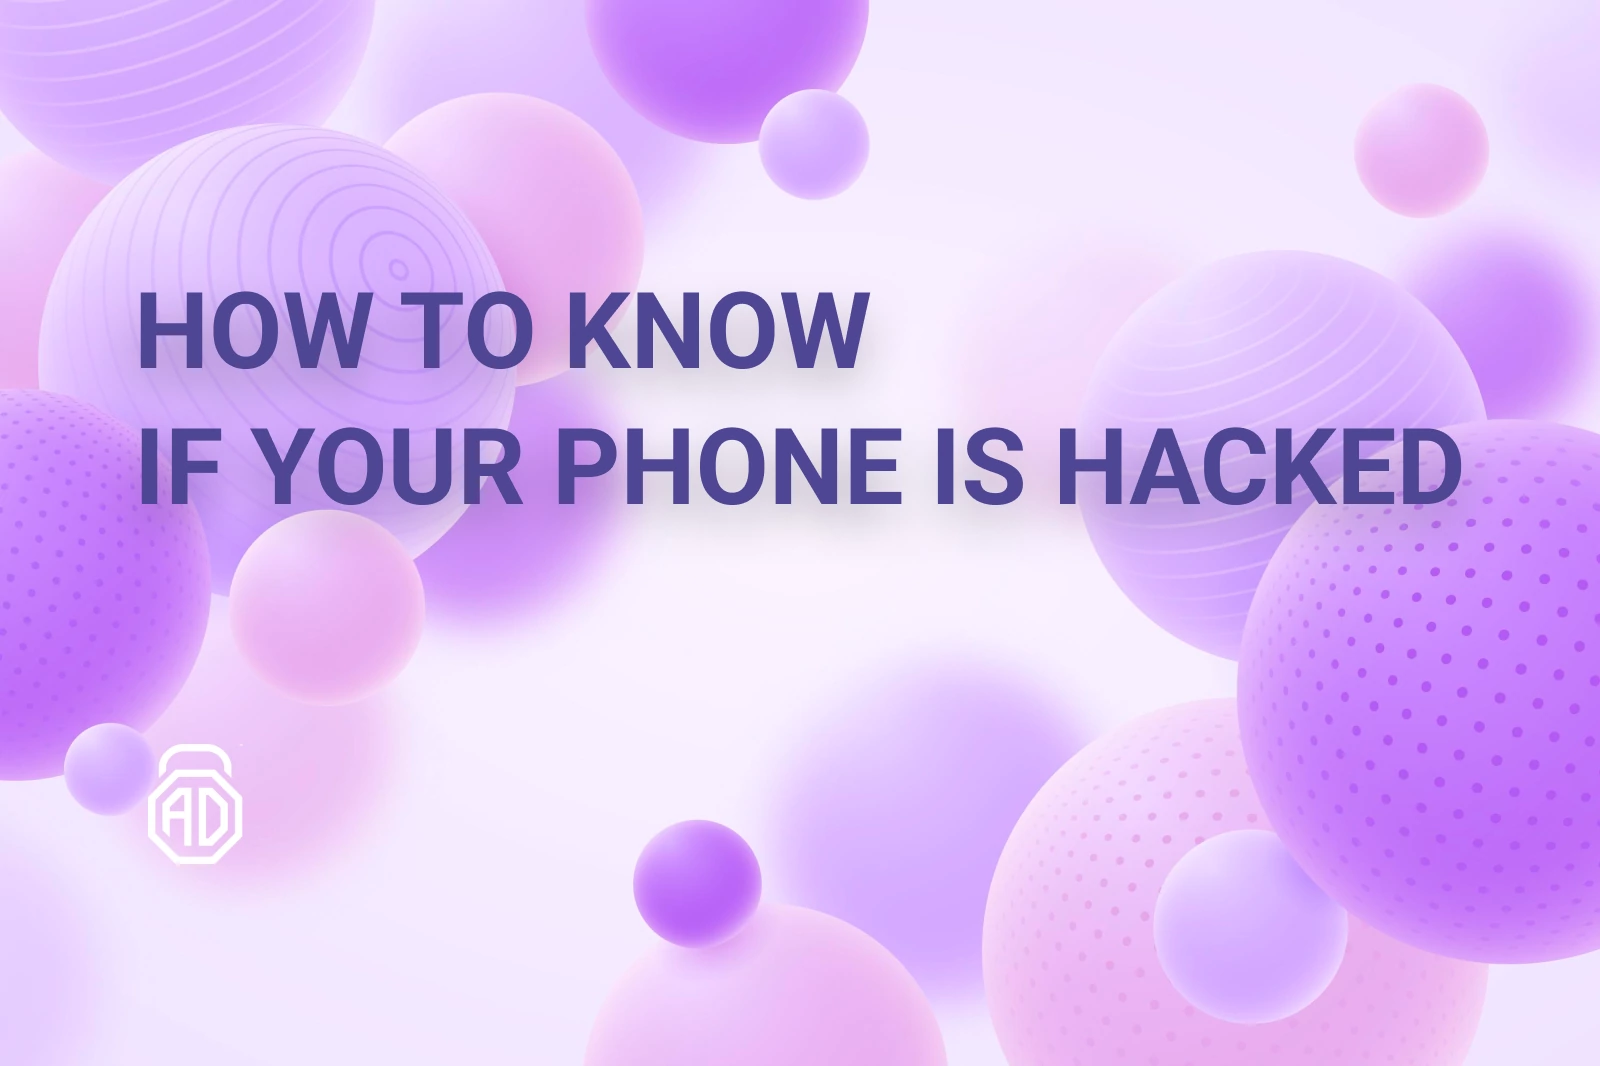 How to Know If Your Phone is Hacked